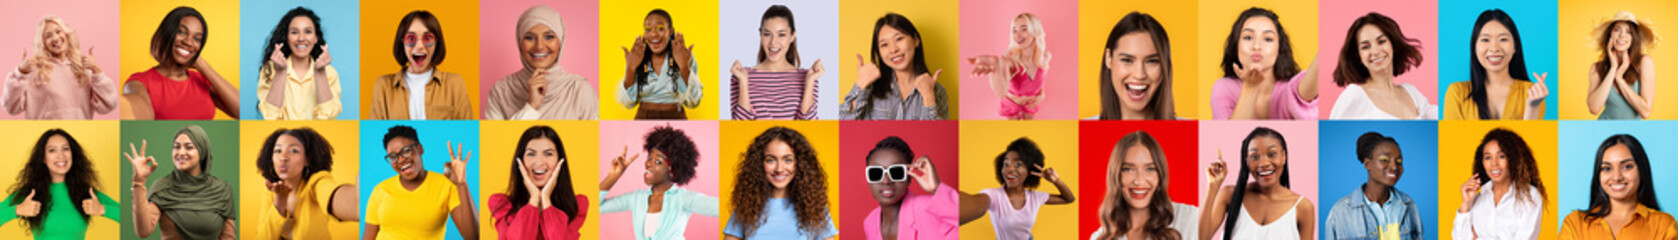 Assorted expressions on diverse women on colorful background